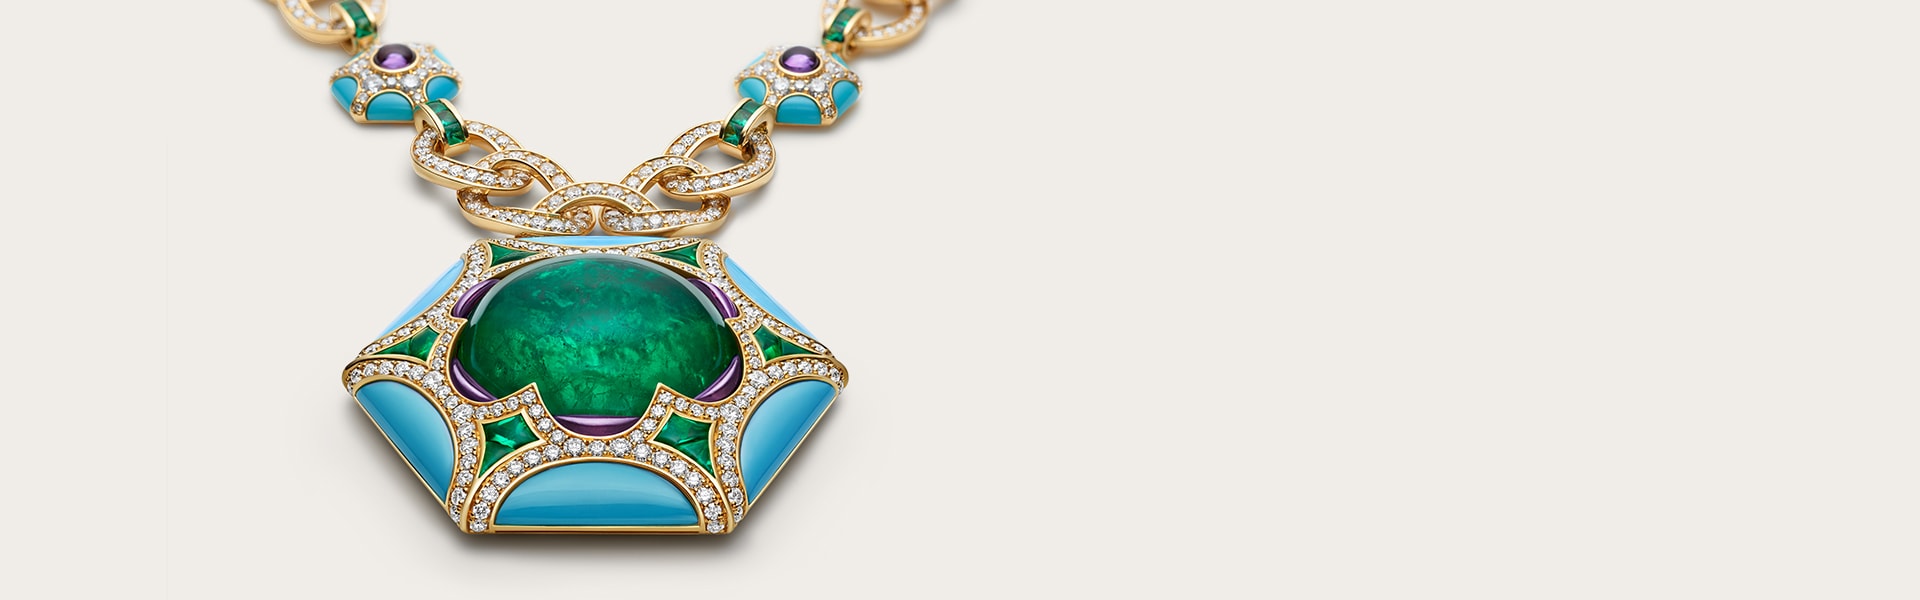 Exedra Mediterranea High Jewelry yellow gold necklace with turquoise, amethysts and diamonds, close-up.